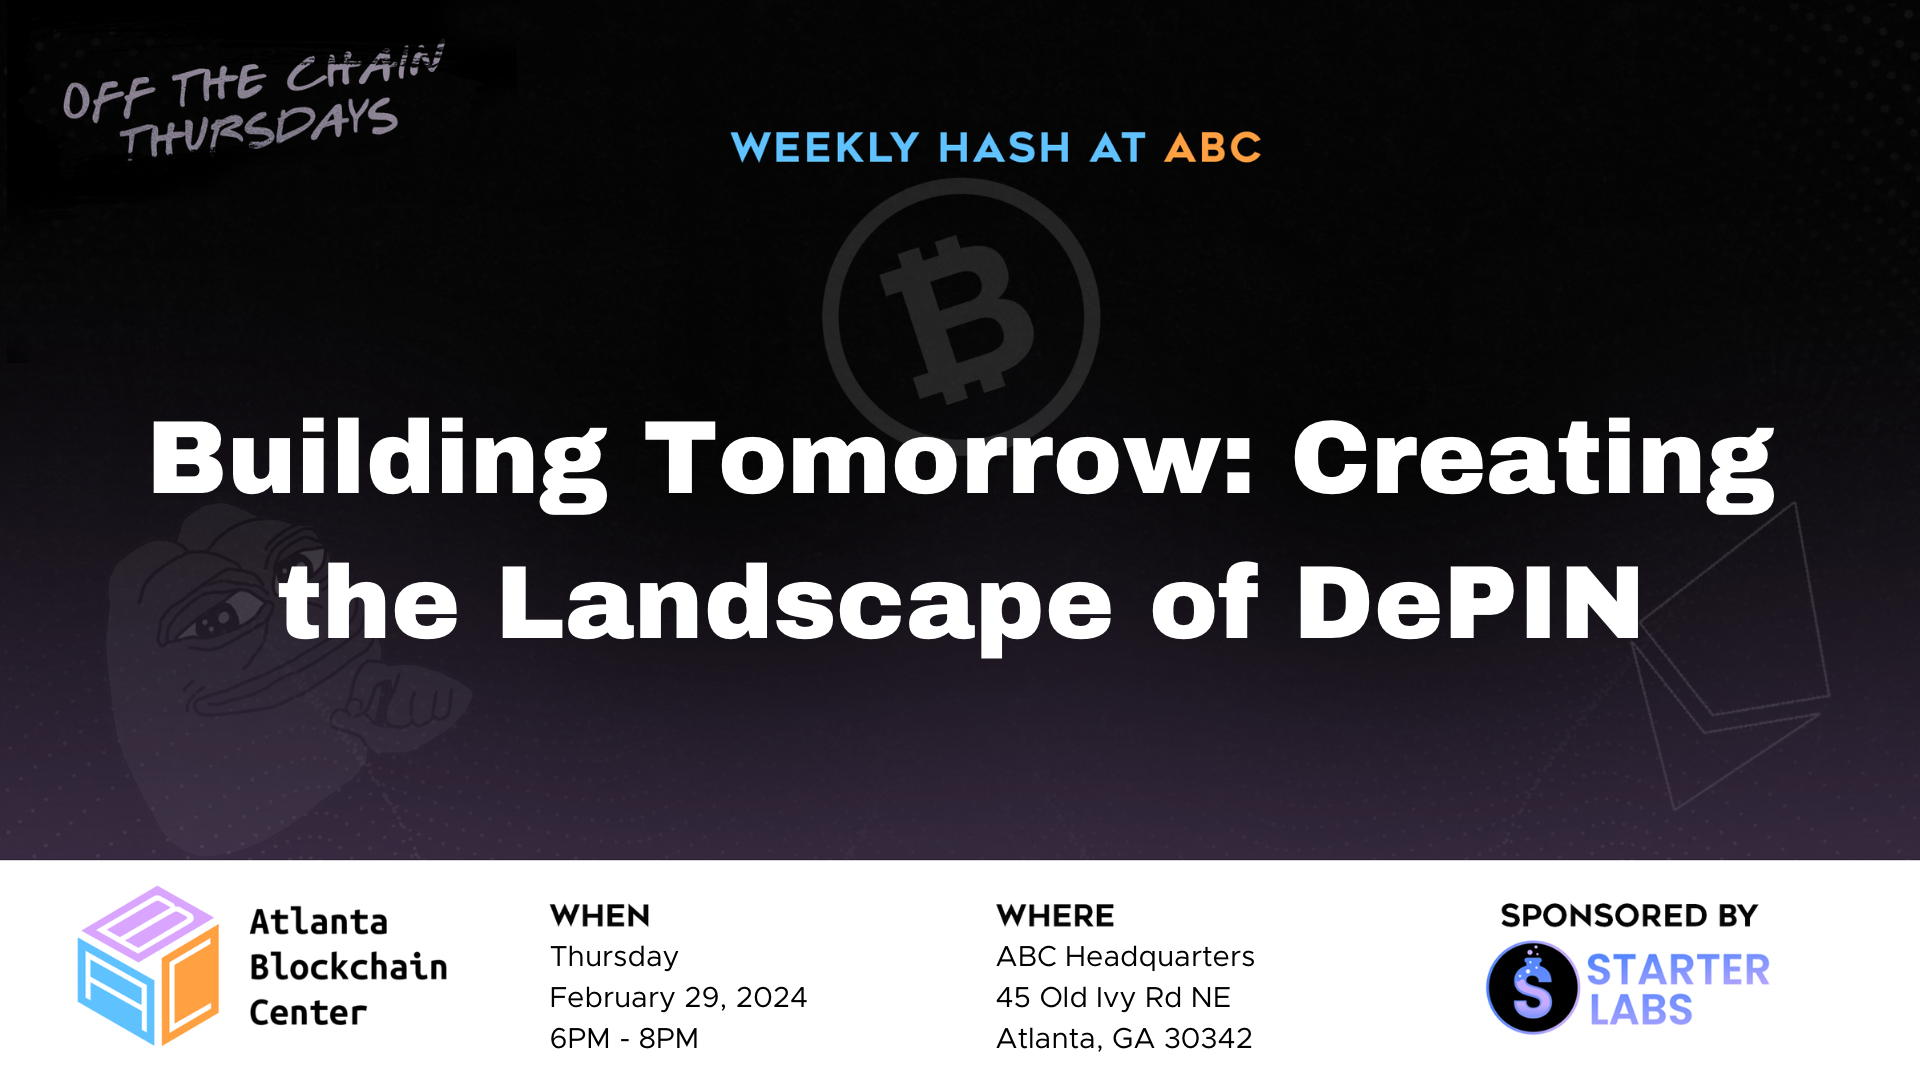 Building Tomorrow: Creating the Landscape of DePIN